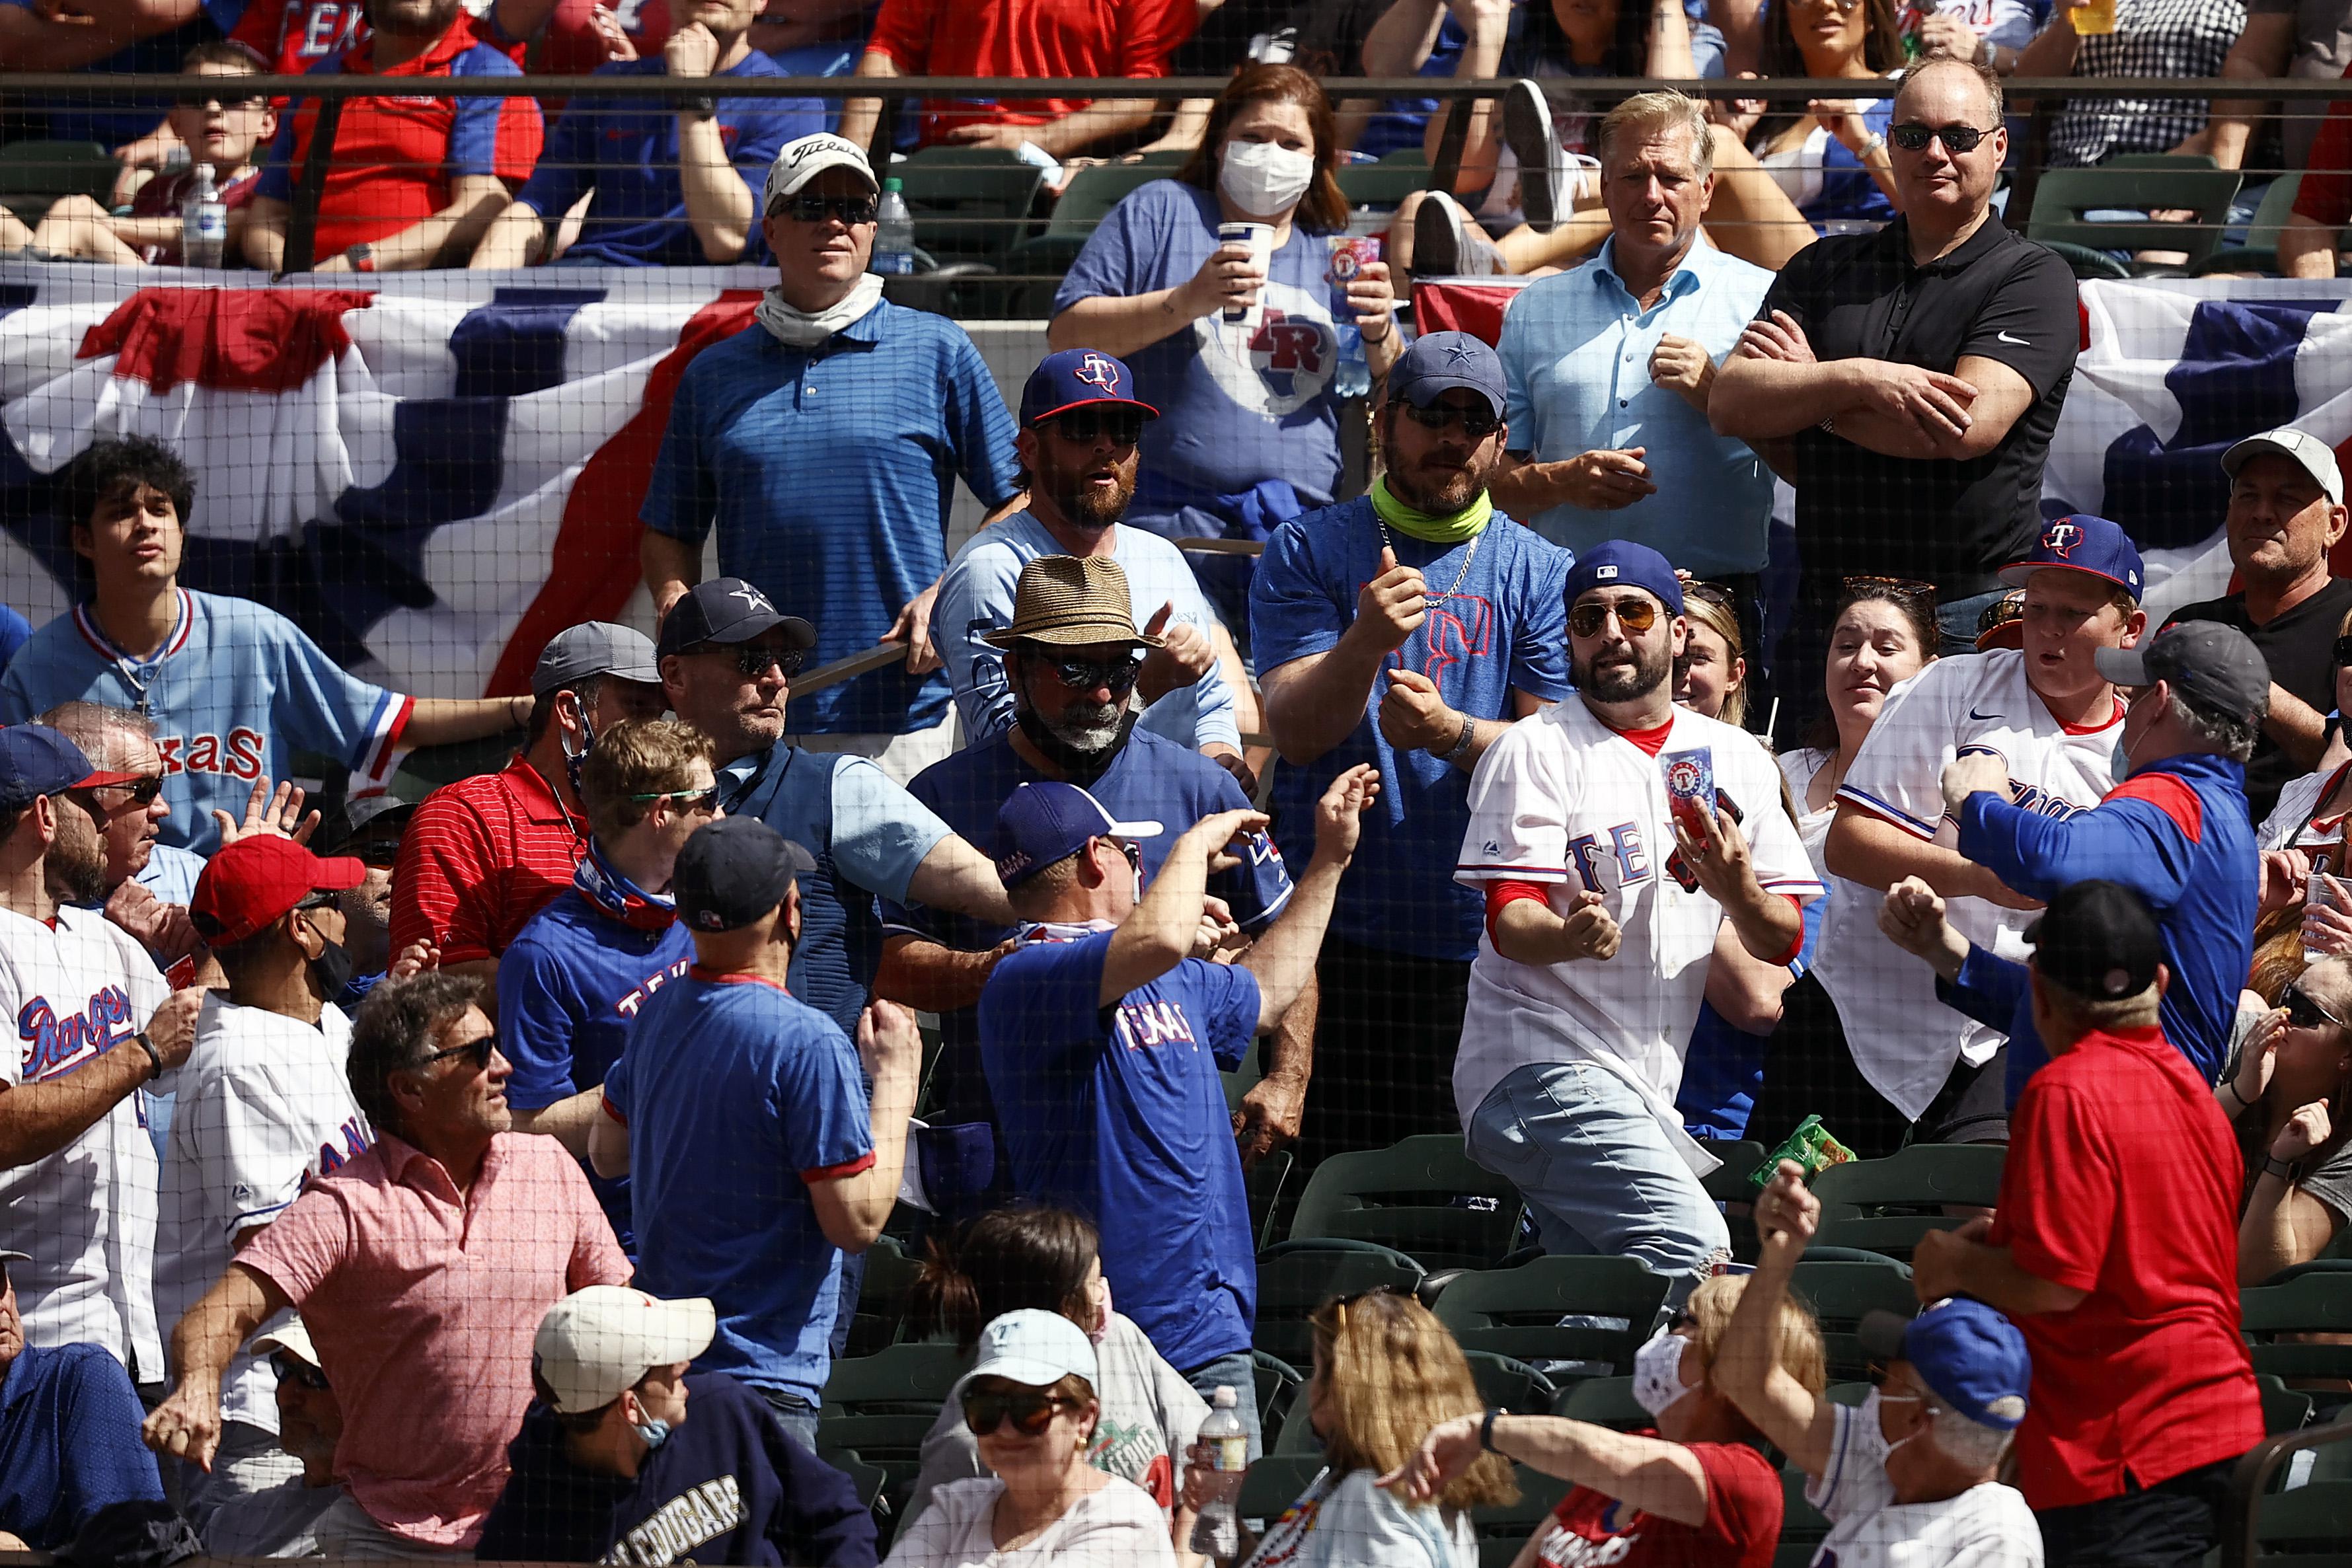 Fans in the stands scramble for a foul ball in the second inning